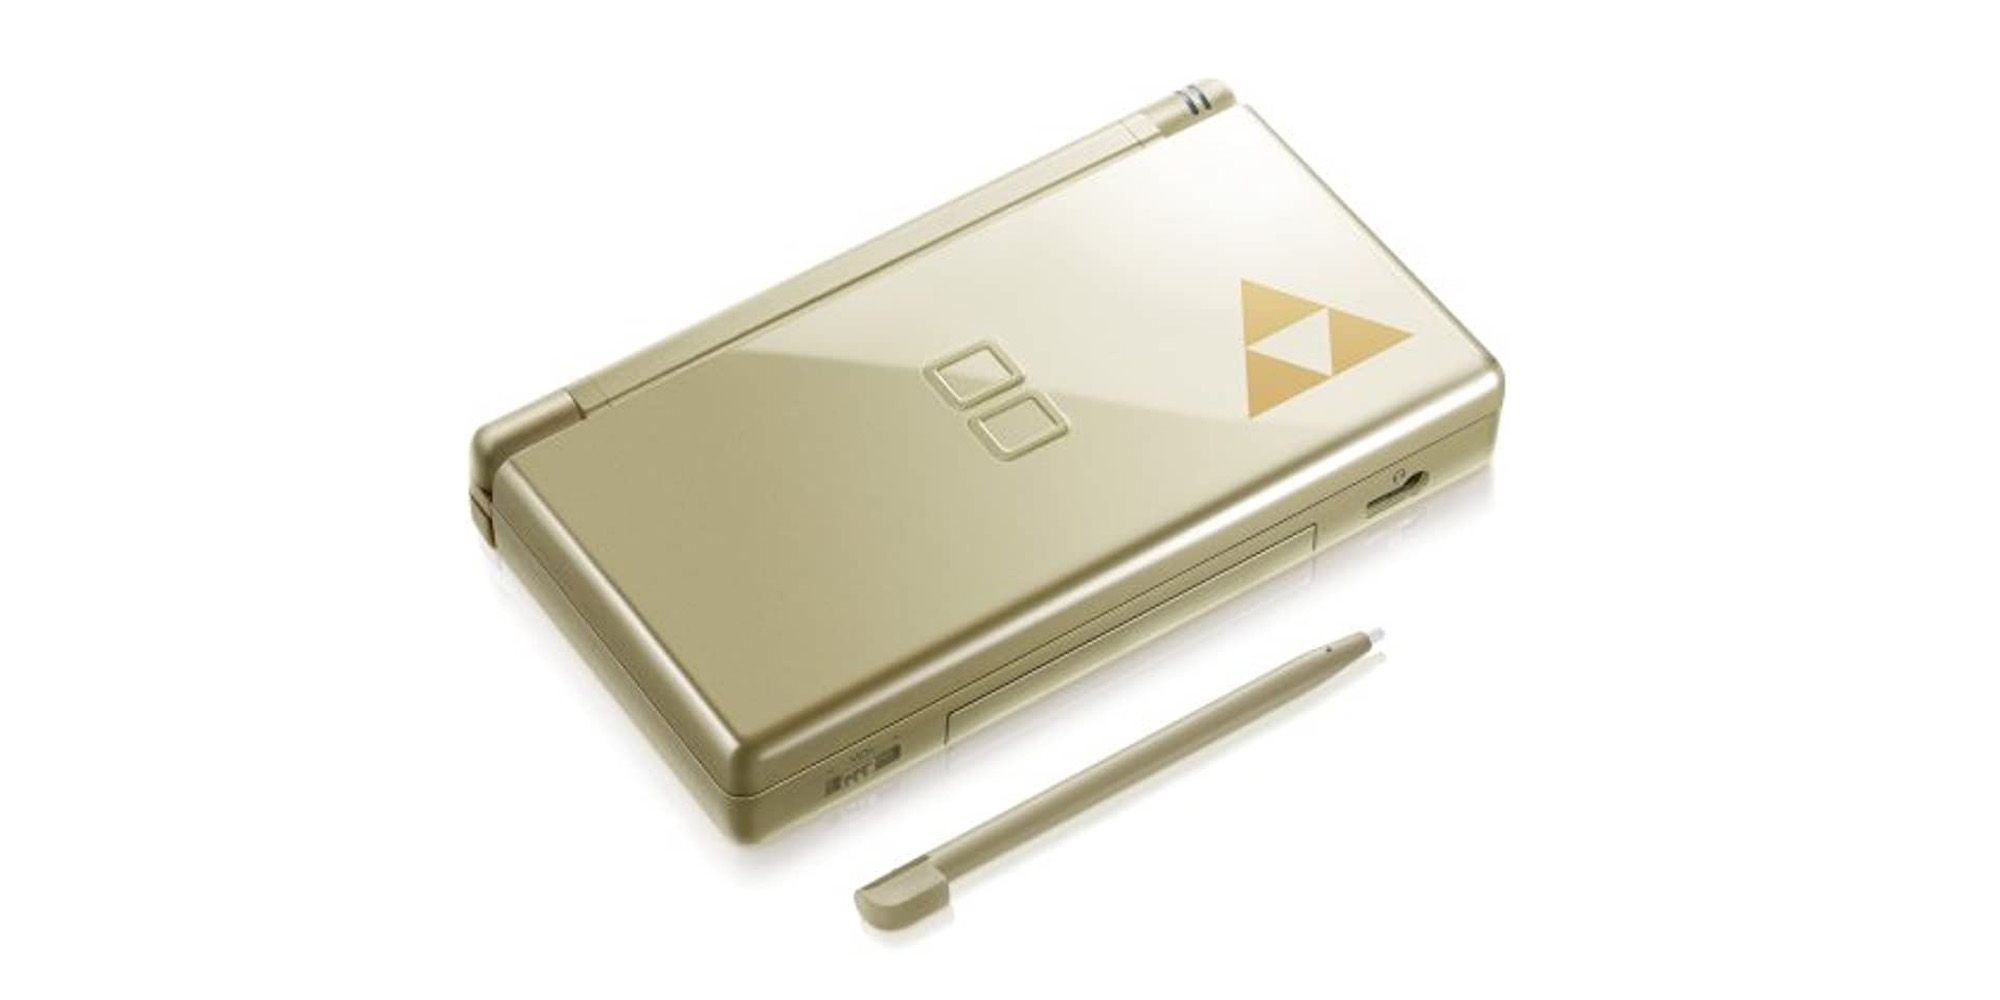 A gold DS Lite with a Triforce in the bottom right of the faceplate.